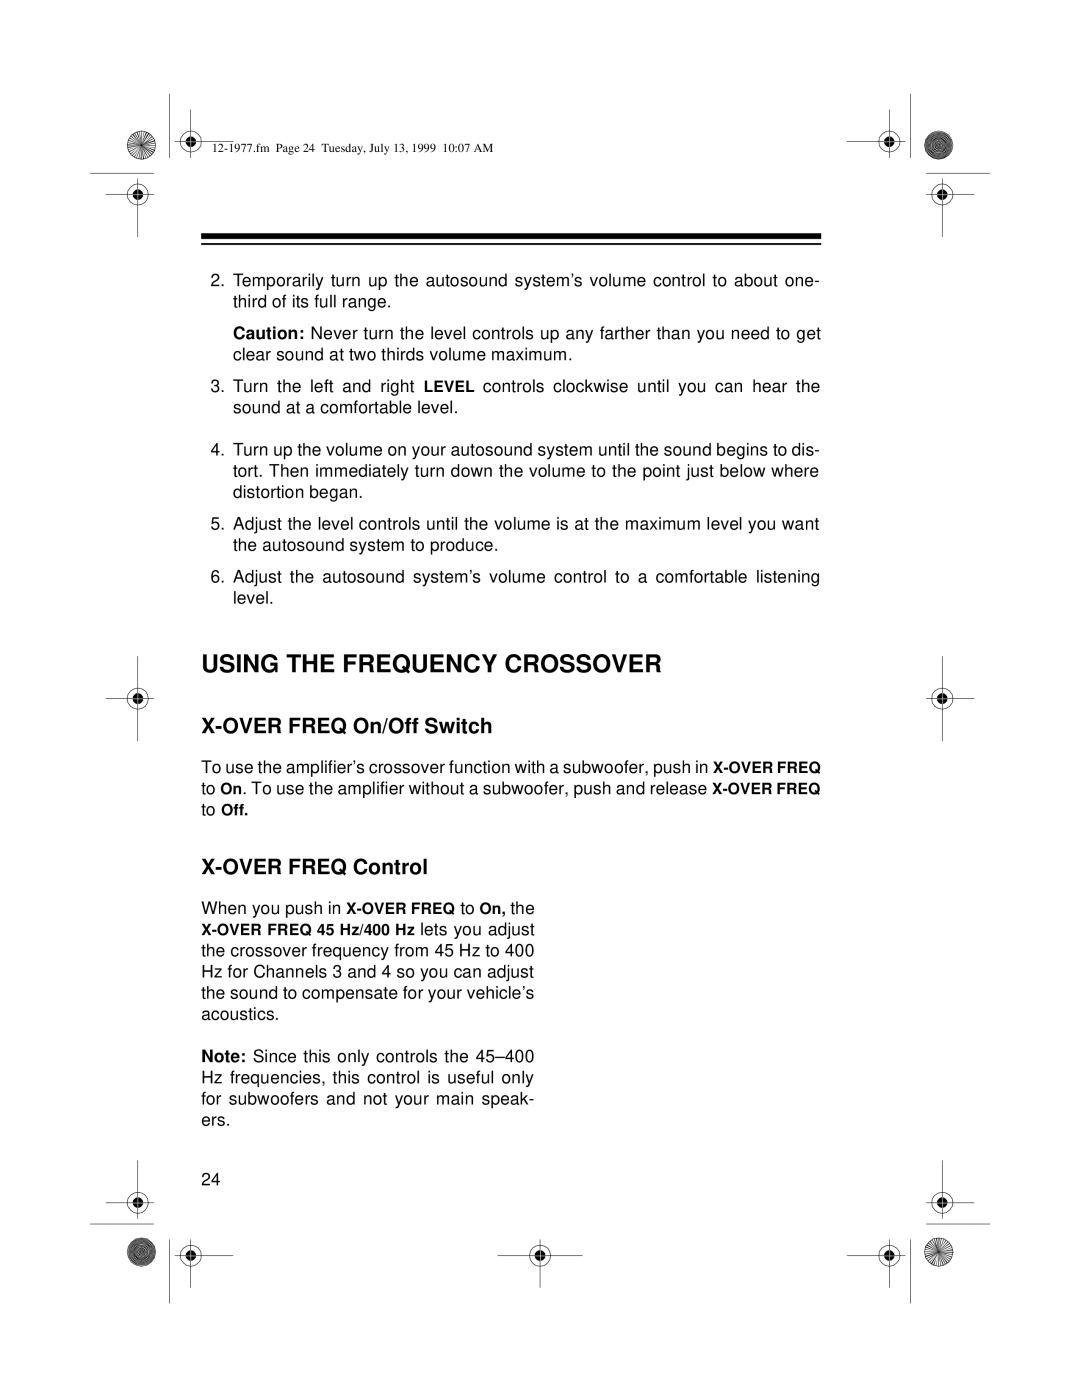 Radio Shack 85 owner manual Using The Frequency Crossover, X-OVERFREQ On/Off Switch, X-OVERFREQ Control 